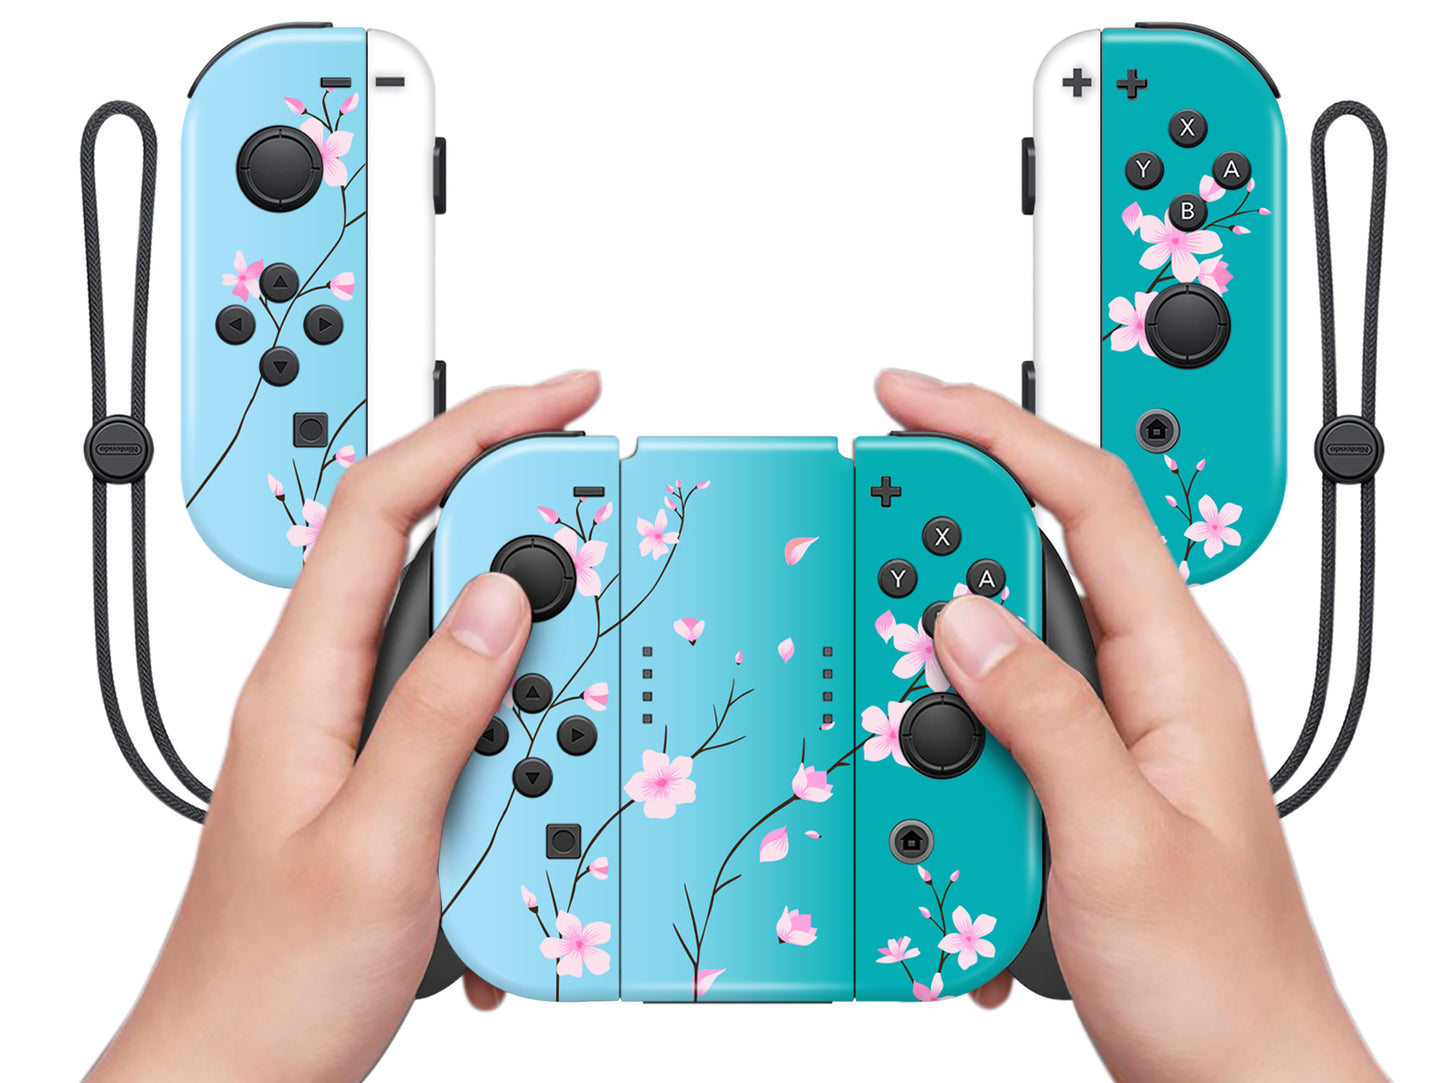 Cherry Blossom Turquoise to blue ombre Full Wrap Vinyl Skin for Nintendo Switch